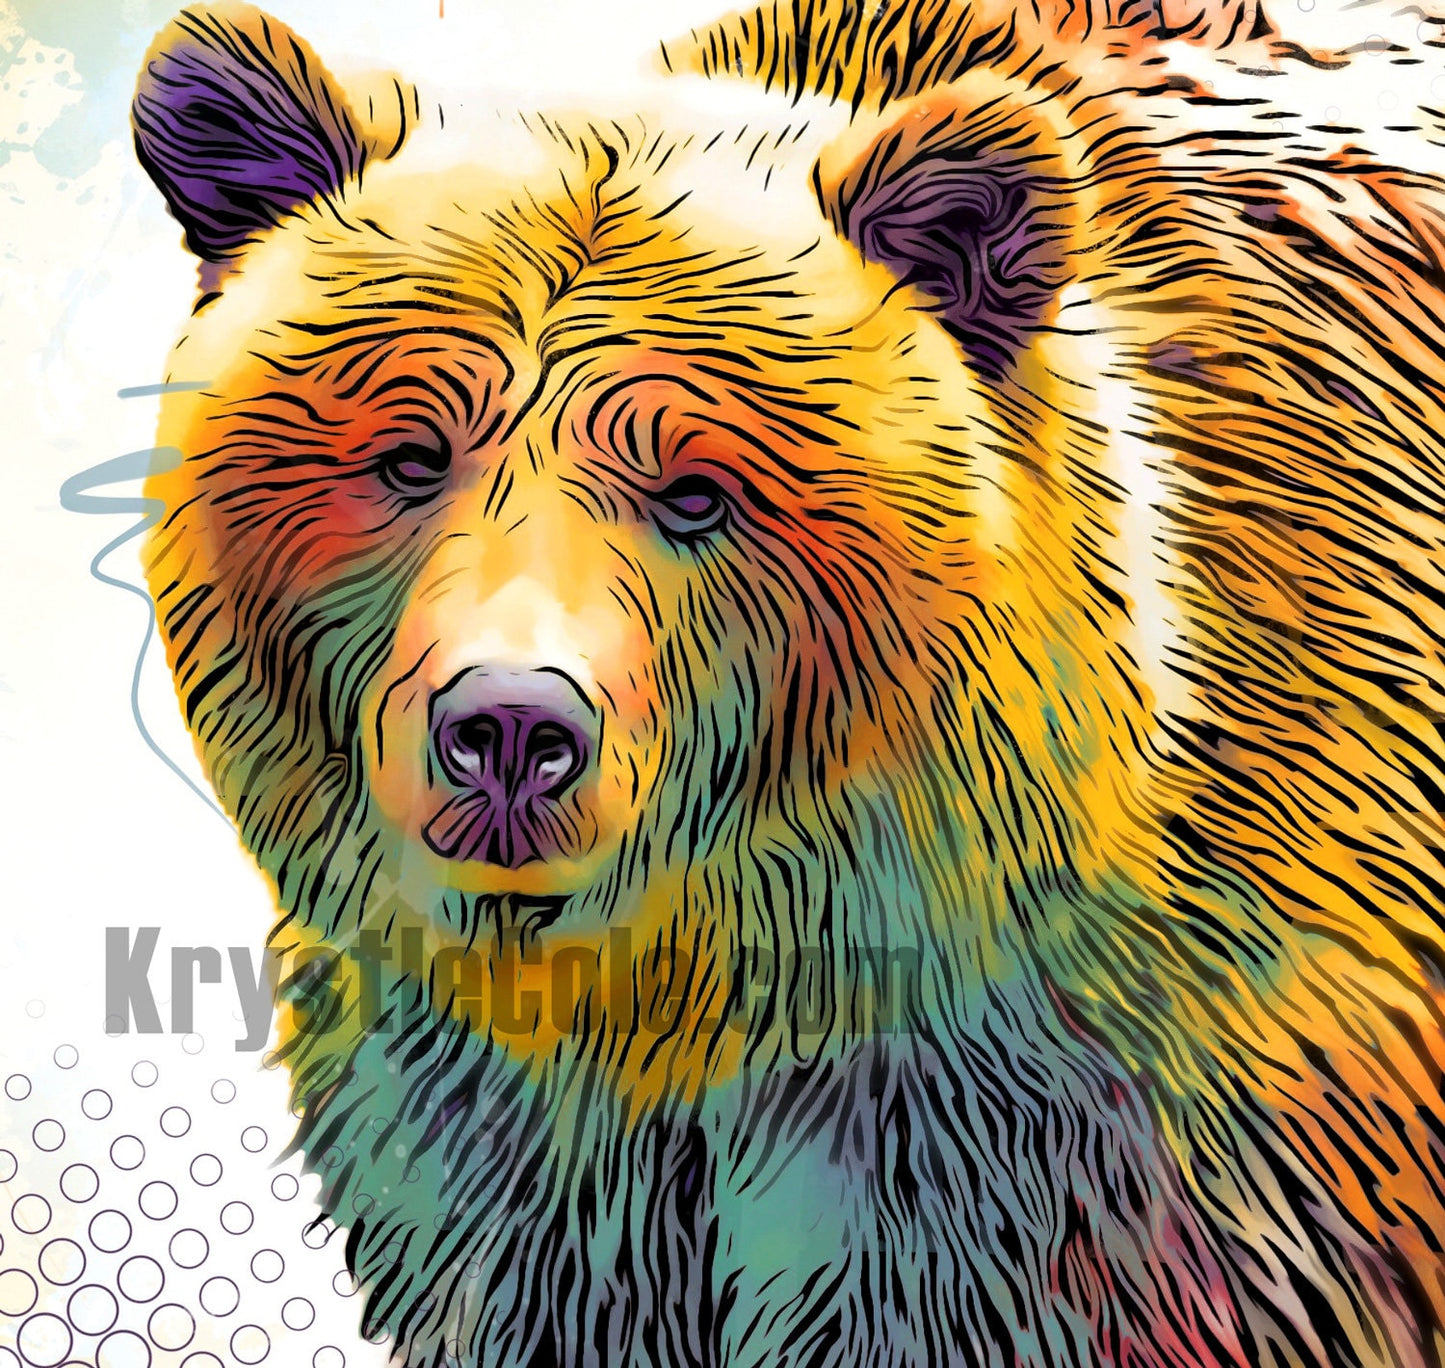 Grizzly Bear Art Print on CANVAS or PAPER - Bear Standing Full Body. Original Artwork by Krystle Cole *Each Print Hand Signed*